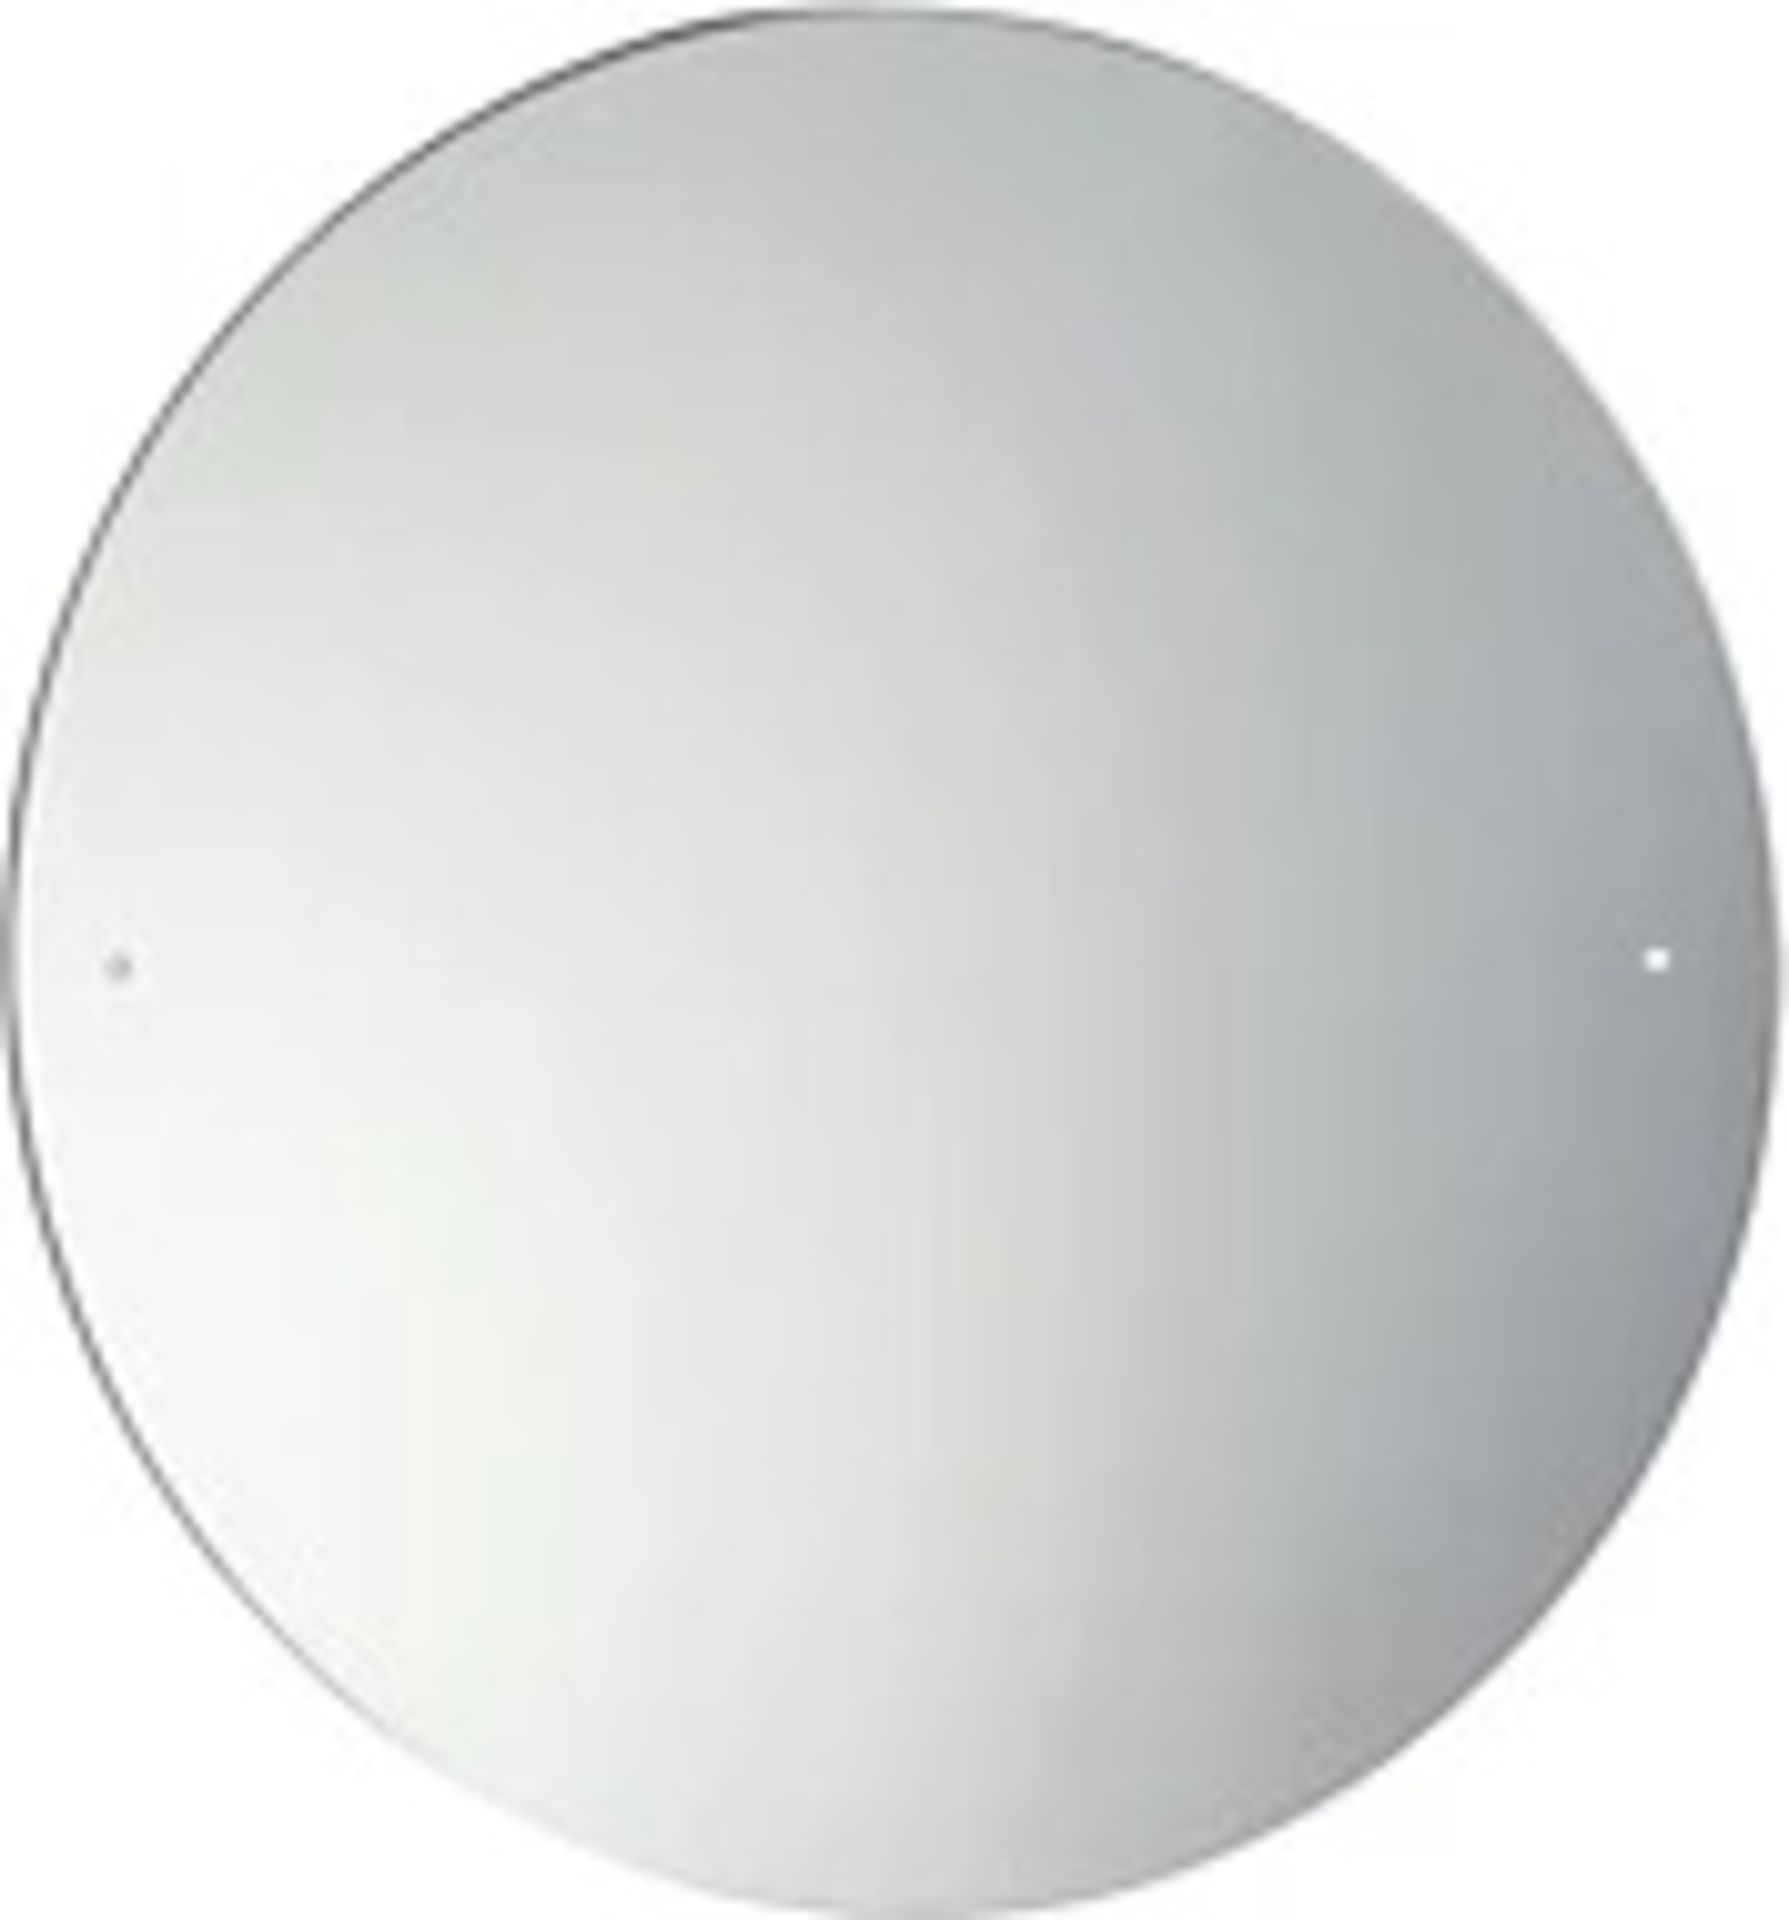 40cm Circular Frameless Bathroom Mirror with Pre-drilled Holes and Wall Hanging Fittings - ER51